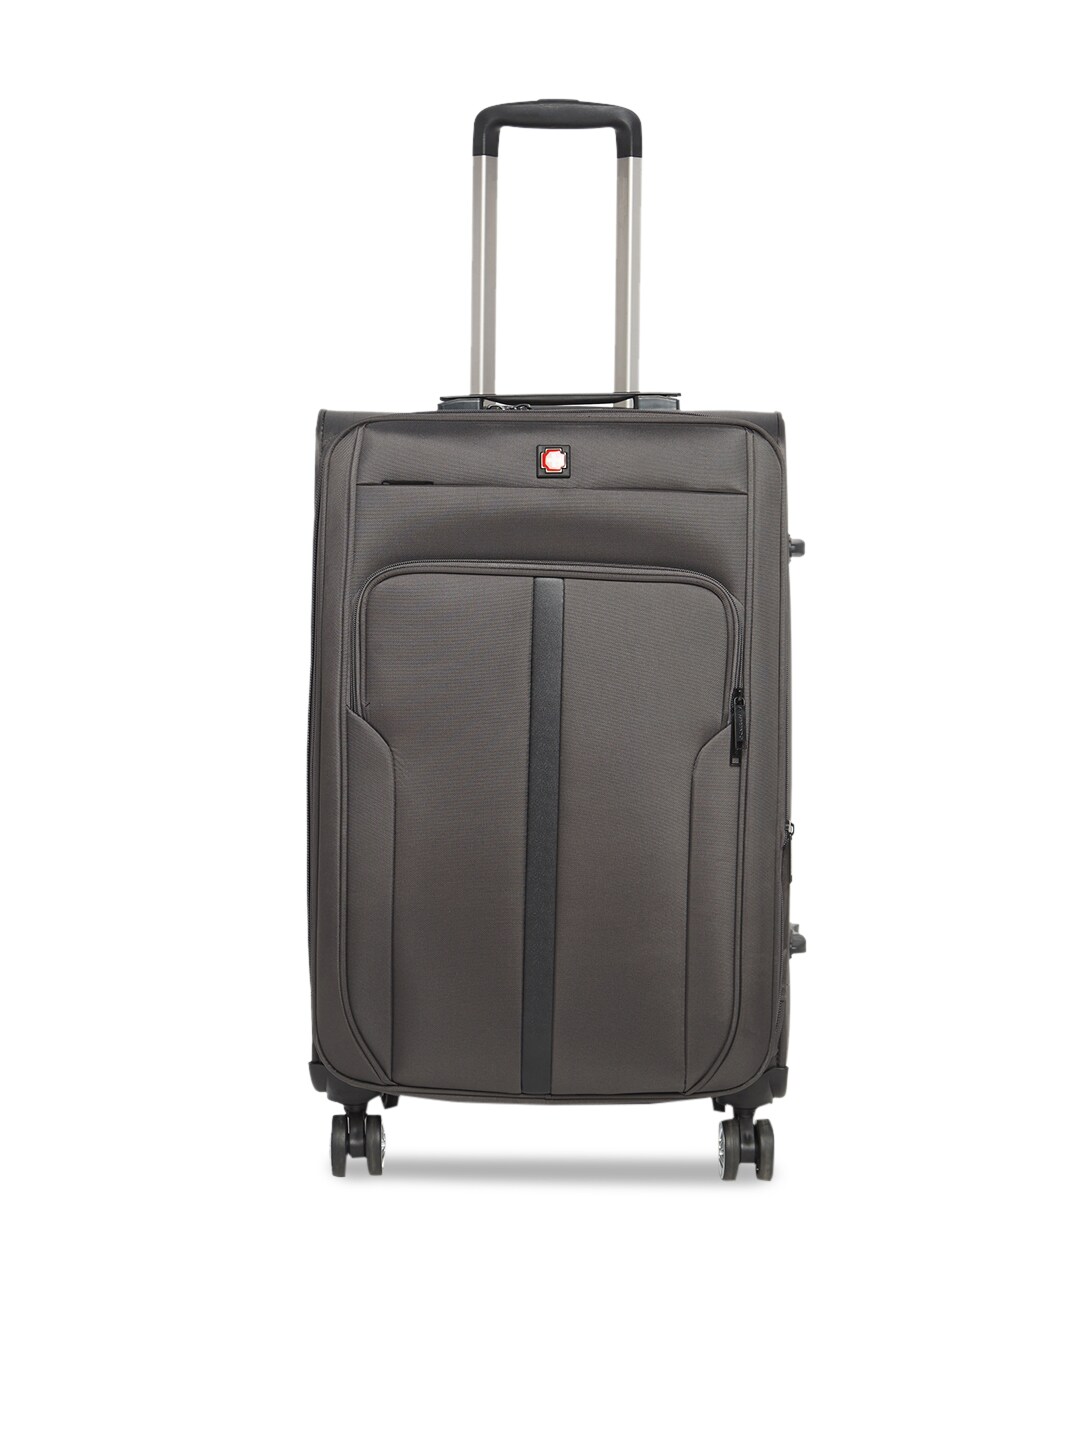 SWISS BRAND Grey Solid Grande 360-Degree Rotation Soft-Sided Medium Trolley Suitcase Price in India